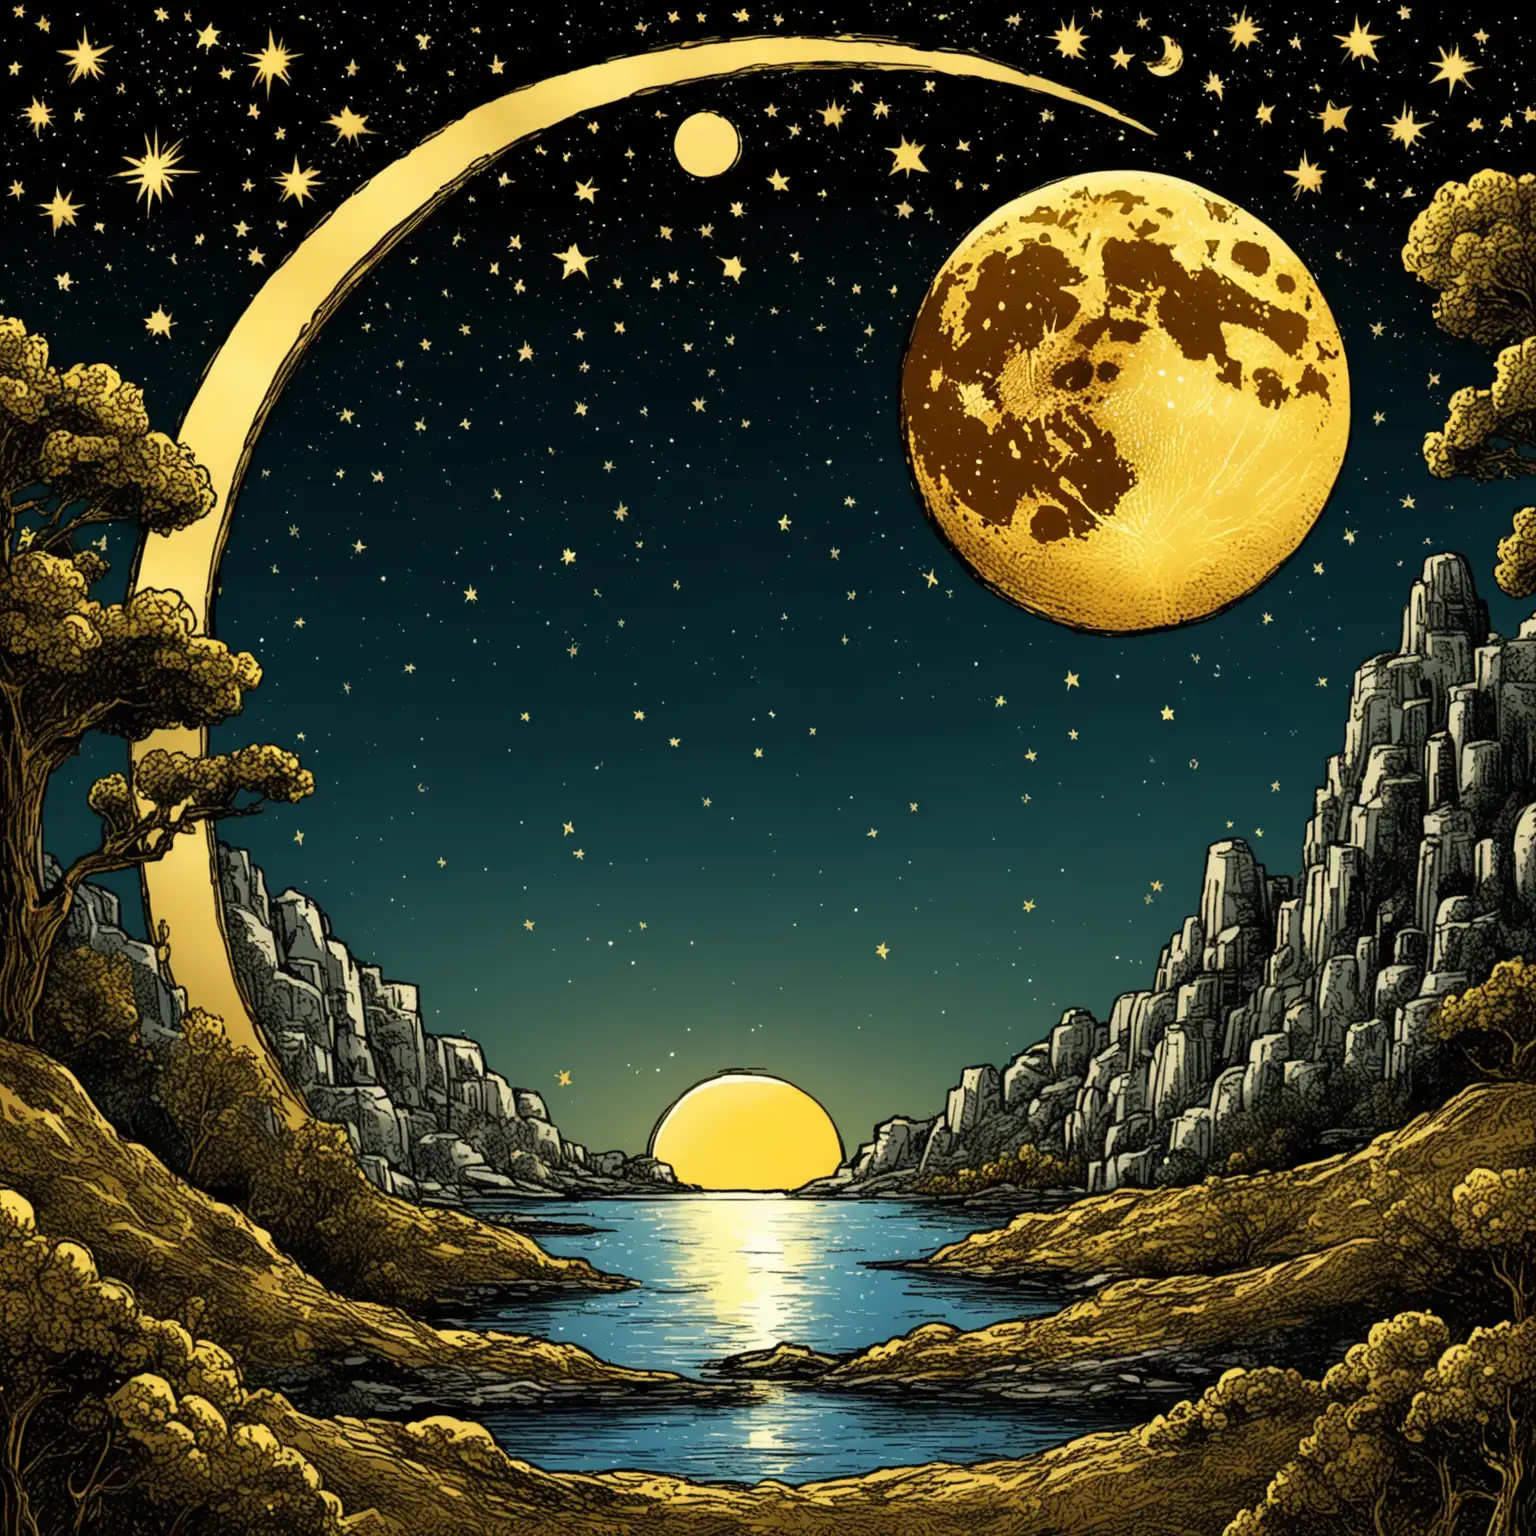 I need a golden round moon photo to use as an avatar, in American comic style, richly detailed, with magical element decoration. Ensure that there is only one moon in the picture.